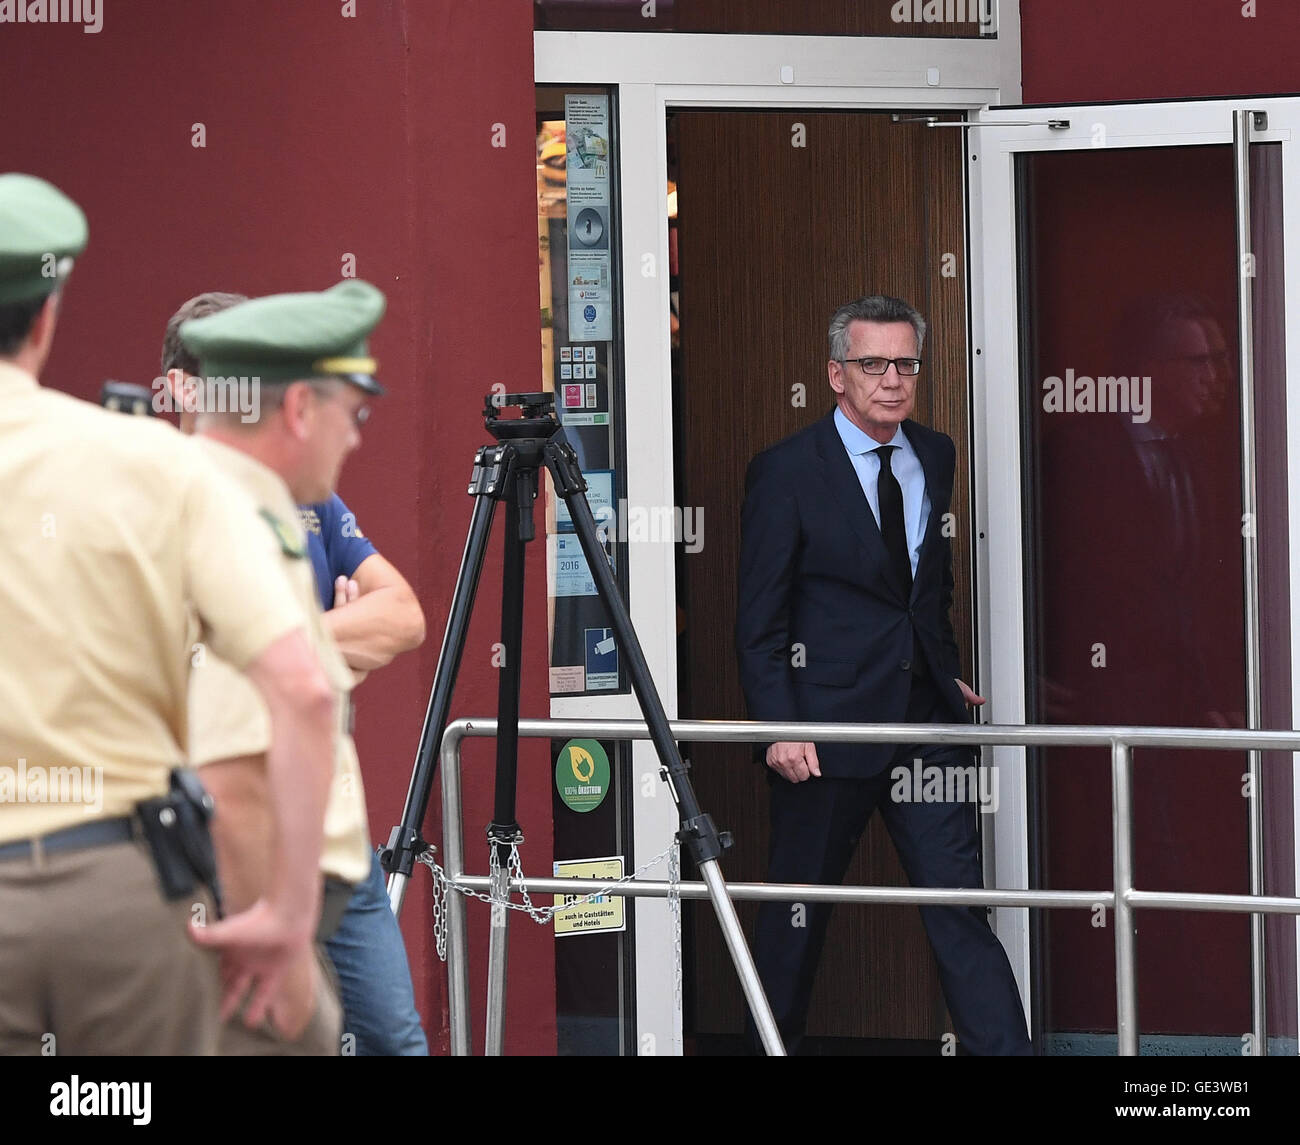 Munich, Germany. 23rd July, 2016. German Interior Minister Thomas de Maiziere (CDU) leaves a McDonald's restaurant after inspecting the crime scene near to the Olympia Einkaufszentrum (OEZ), one day after a shooting with deaths and casualties in the building, in Munich, Germany, 23 July 2016. The fatal shooting was carried out by an 18-year-old German-Iranian man. Ten people died, including the perpetrator. Photo: SVEN HOPPE/dpa/Alamy Live News Stock Photo